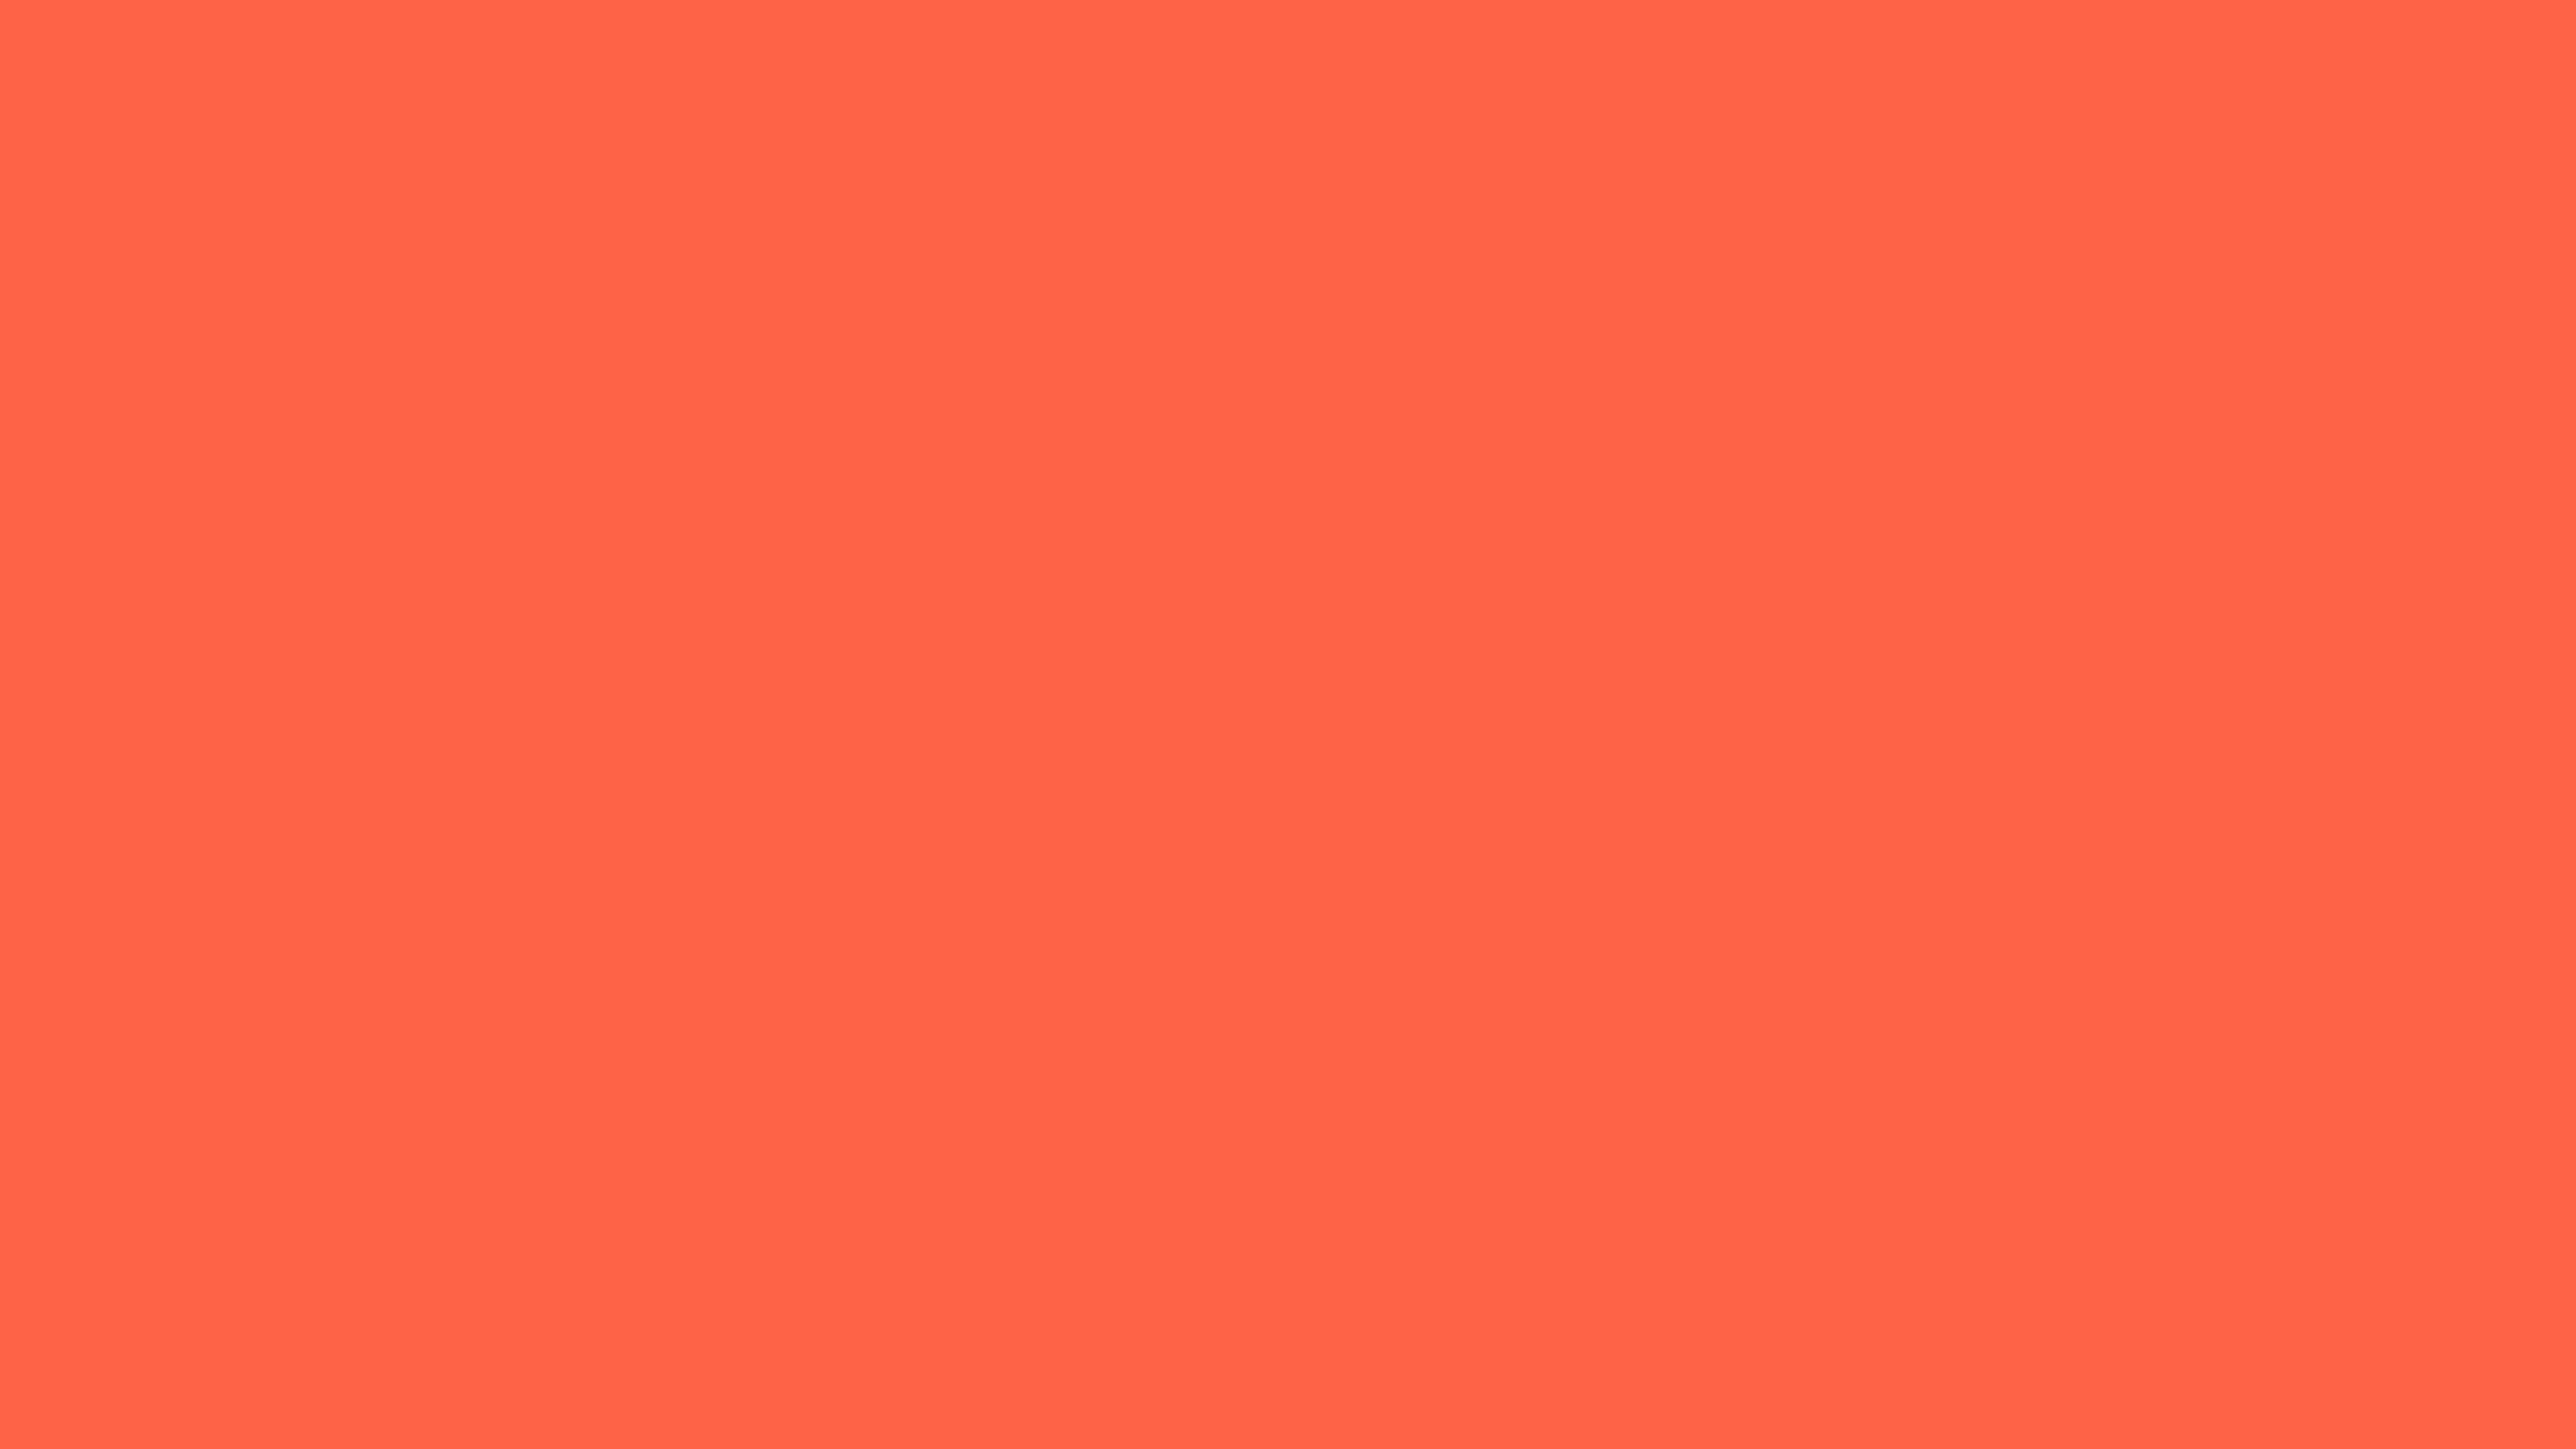 5120x2880 Tomato Solid Color Background